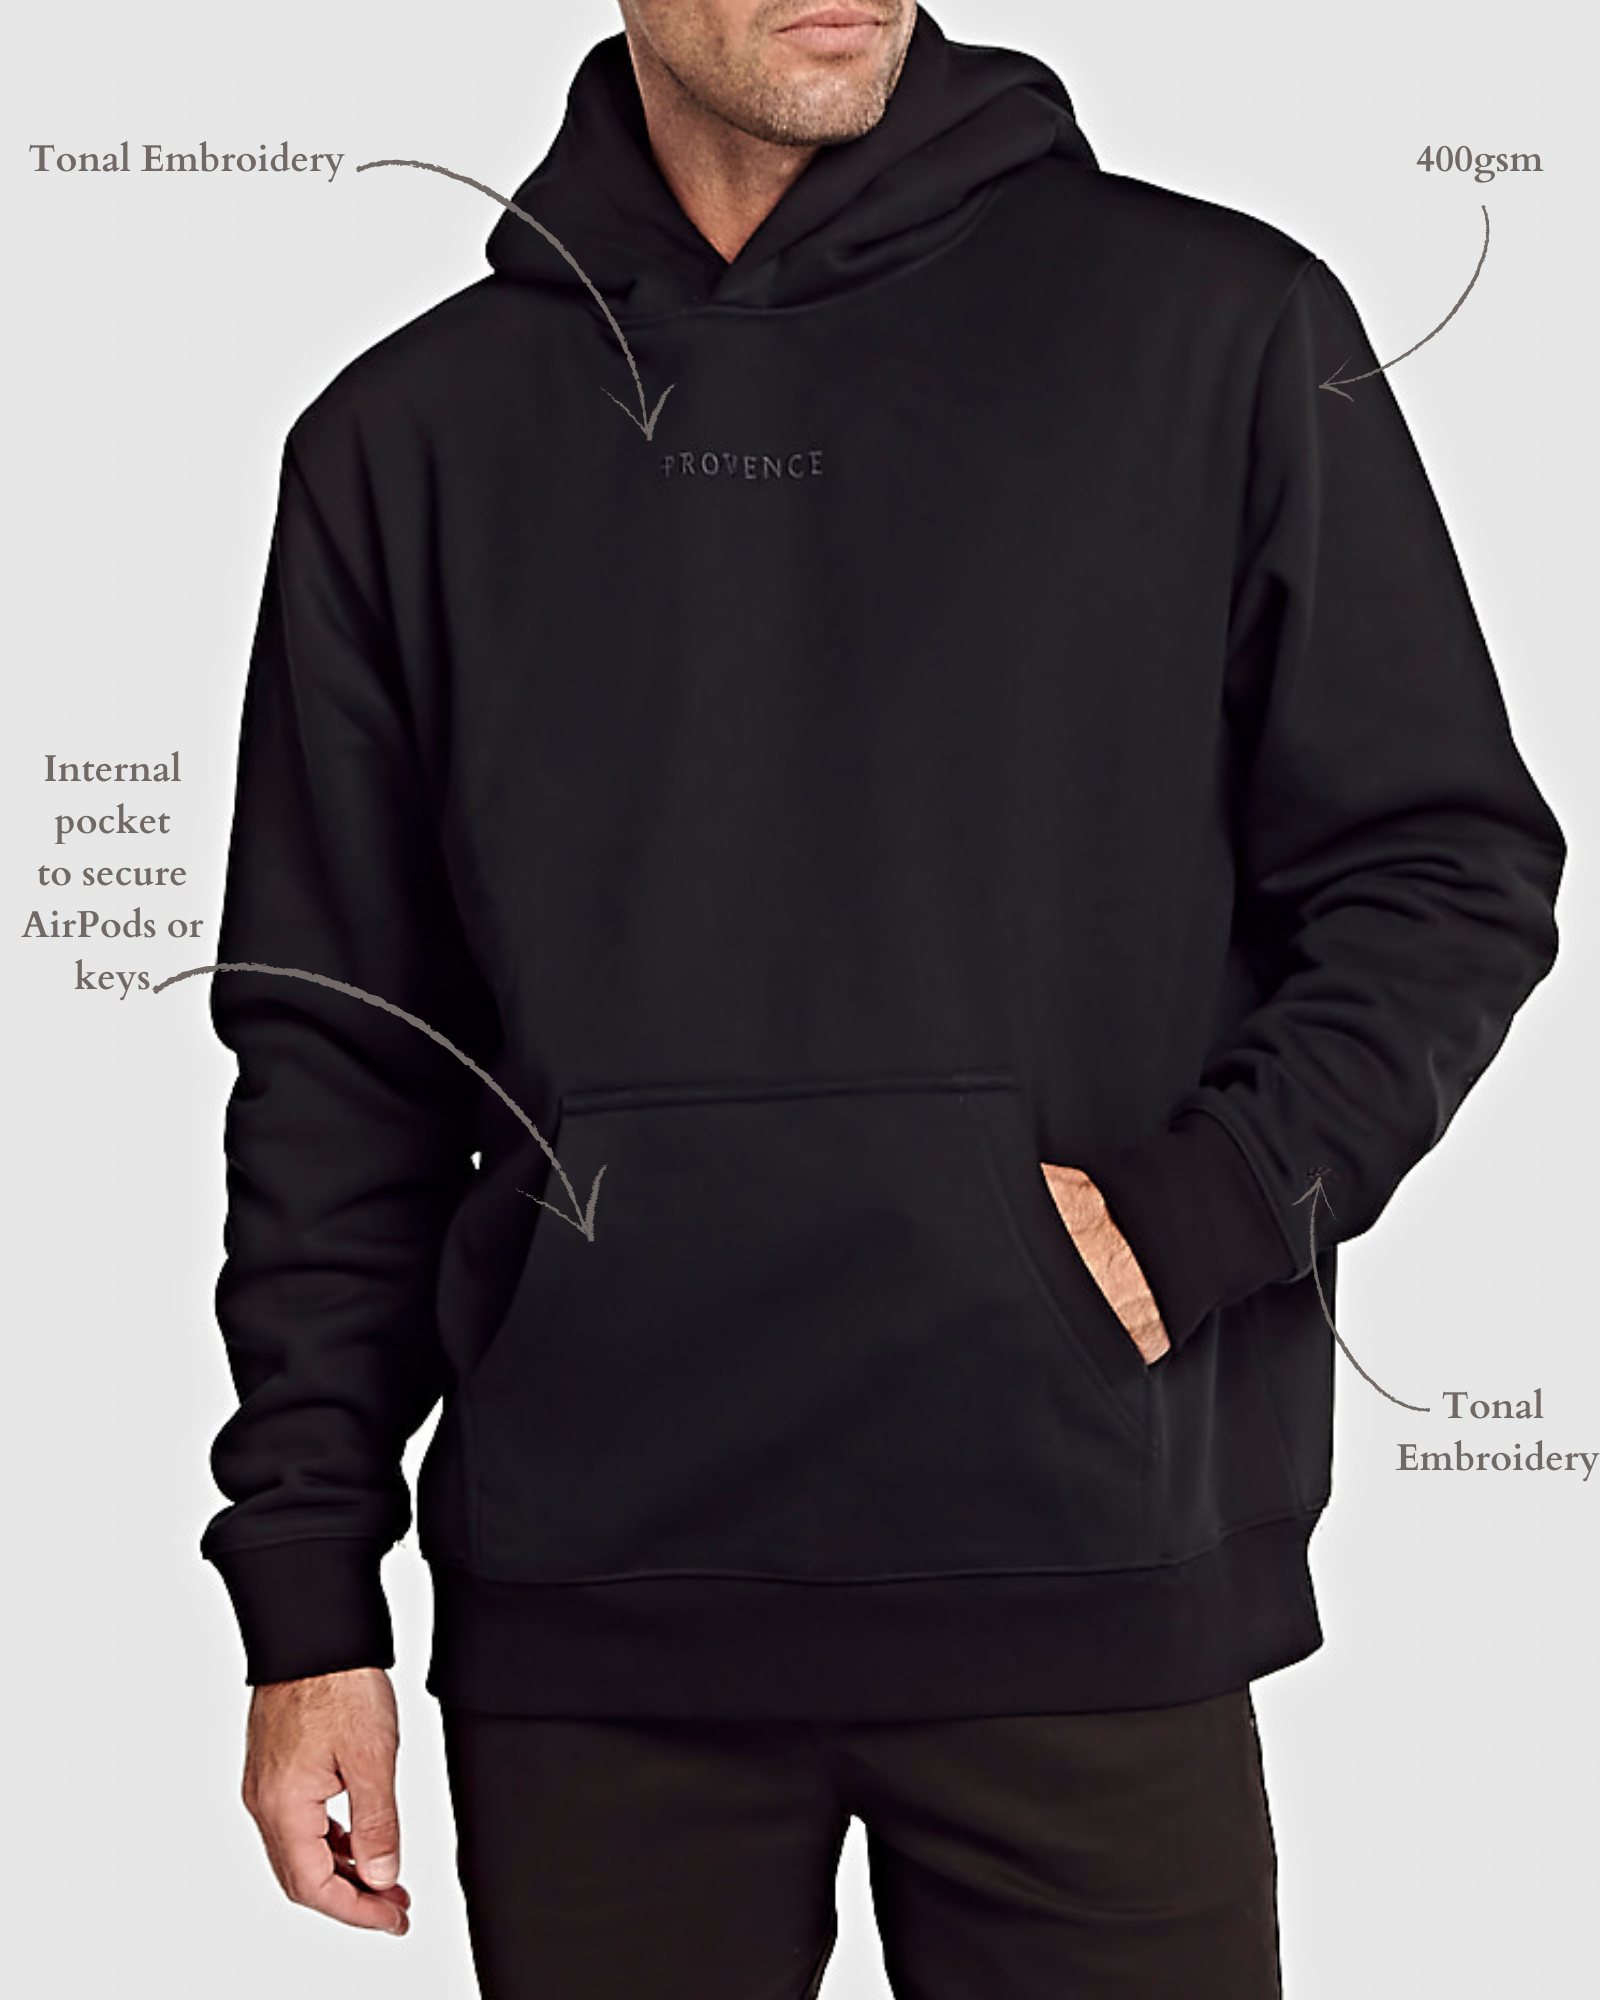 THE ONLY BLACK HOODIE YOU NEED